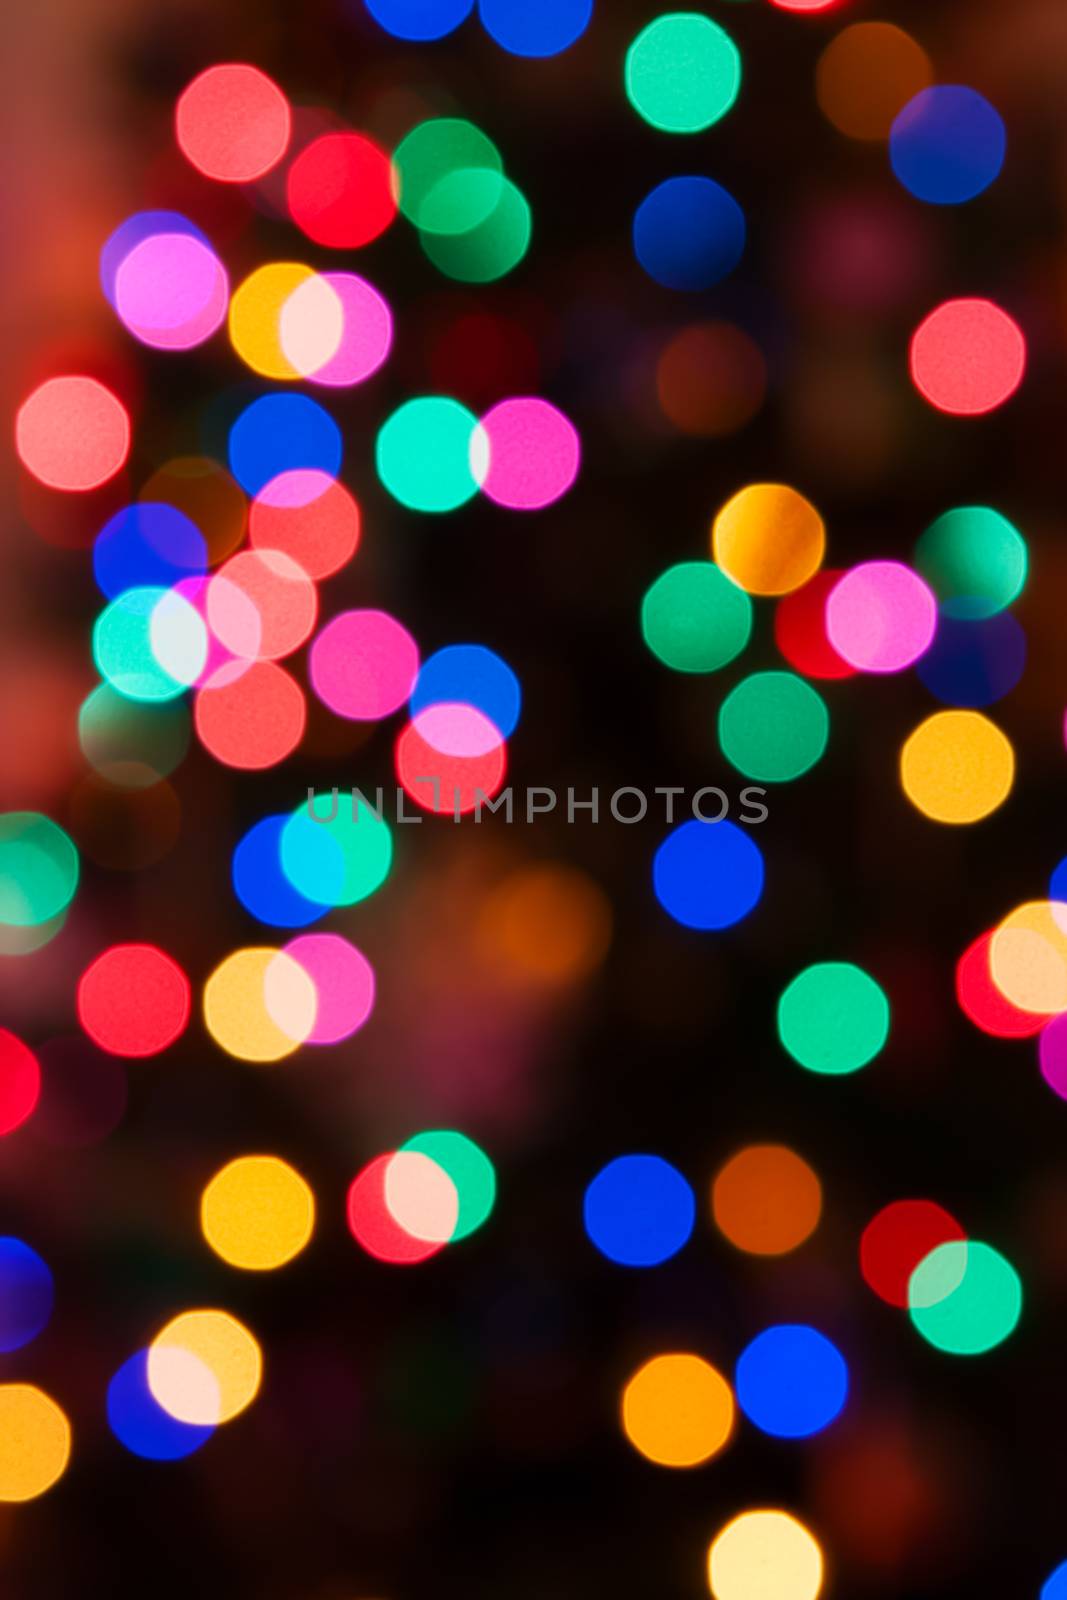 Glowing Christmas lights background in soft focus by Coffee999